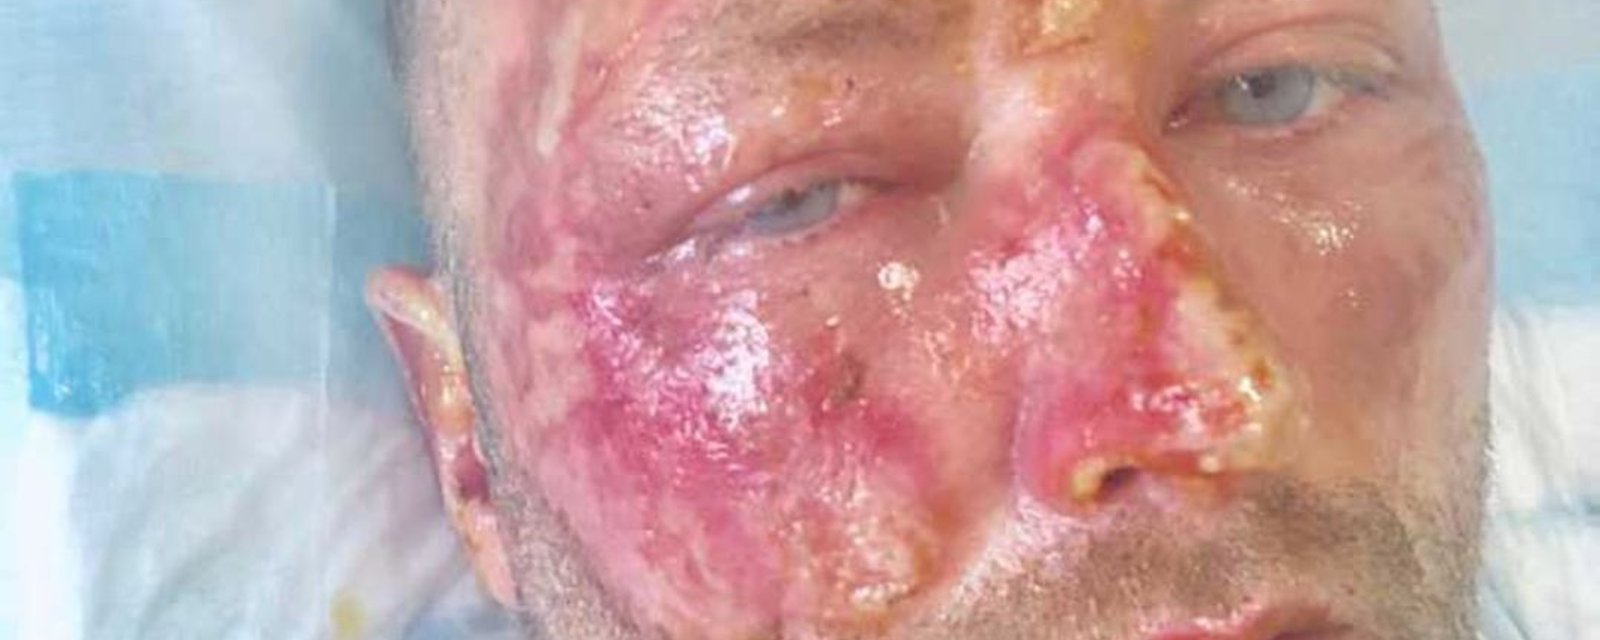 Former NHLer suffers atrocious burns to his face and upper body in accident 